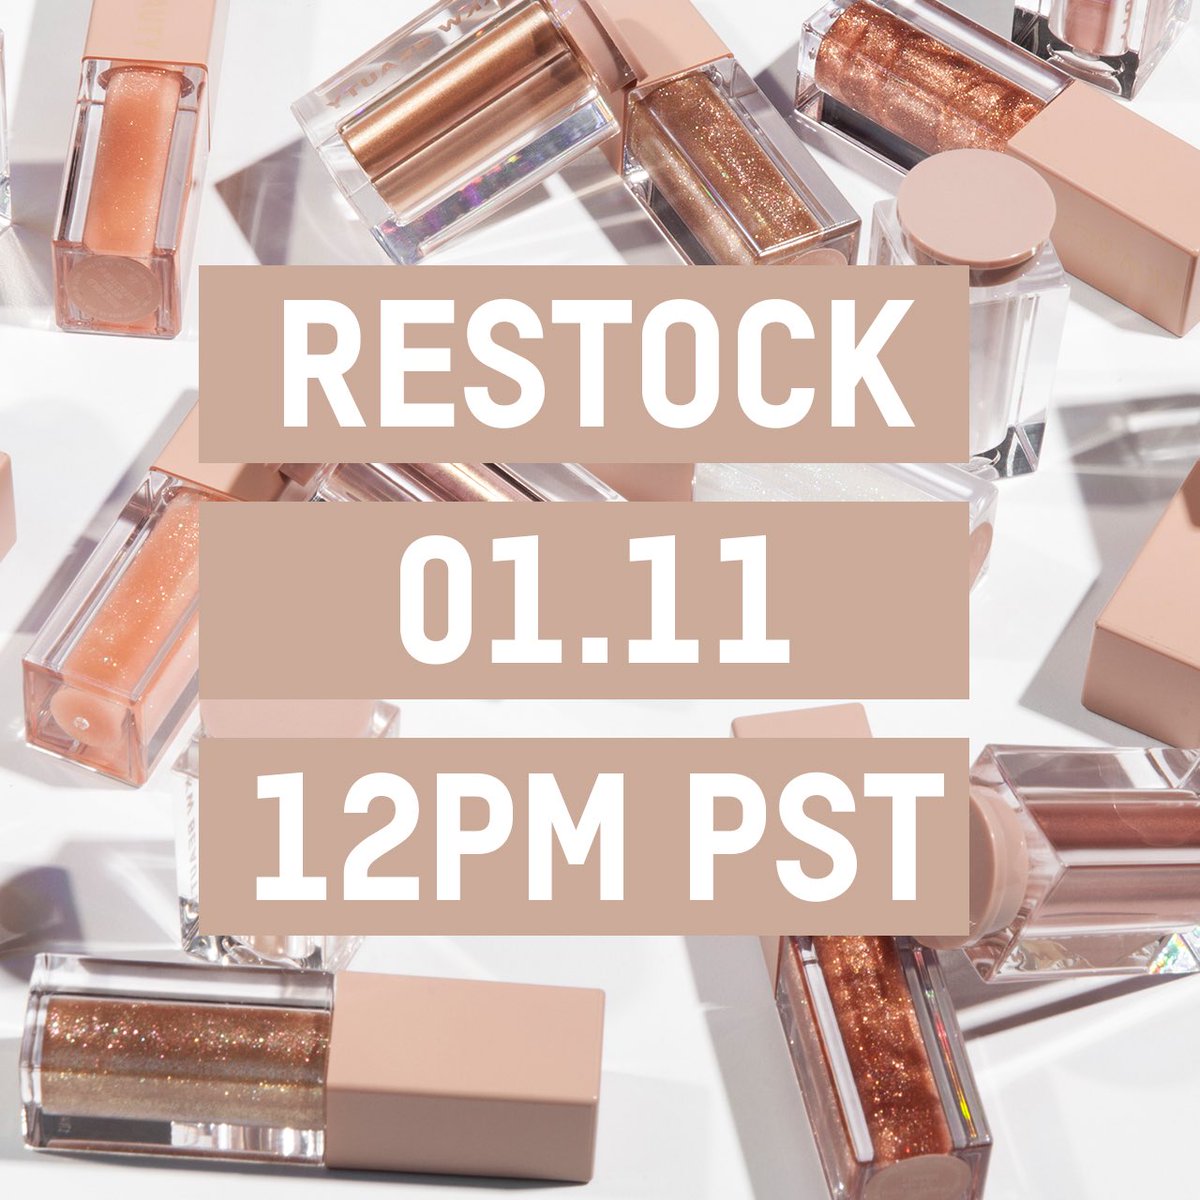 RT @kkwbeauty: Ultralight Beams Collection will be back in stock tomorrow 12pm PST only at https://t.co/32qaKbs5YG https://t.co/LPUbydEnJy